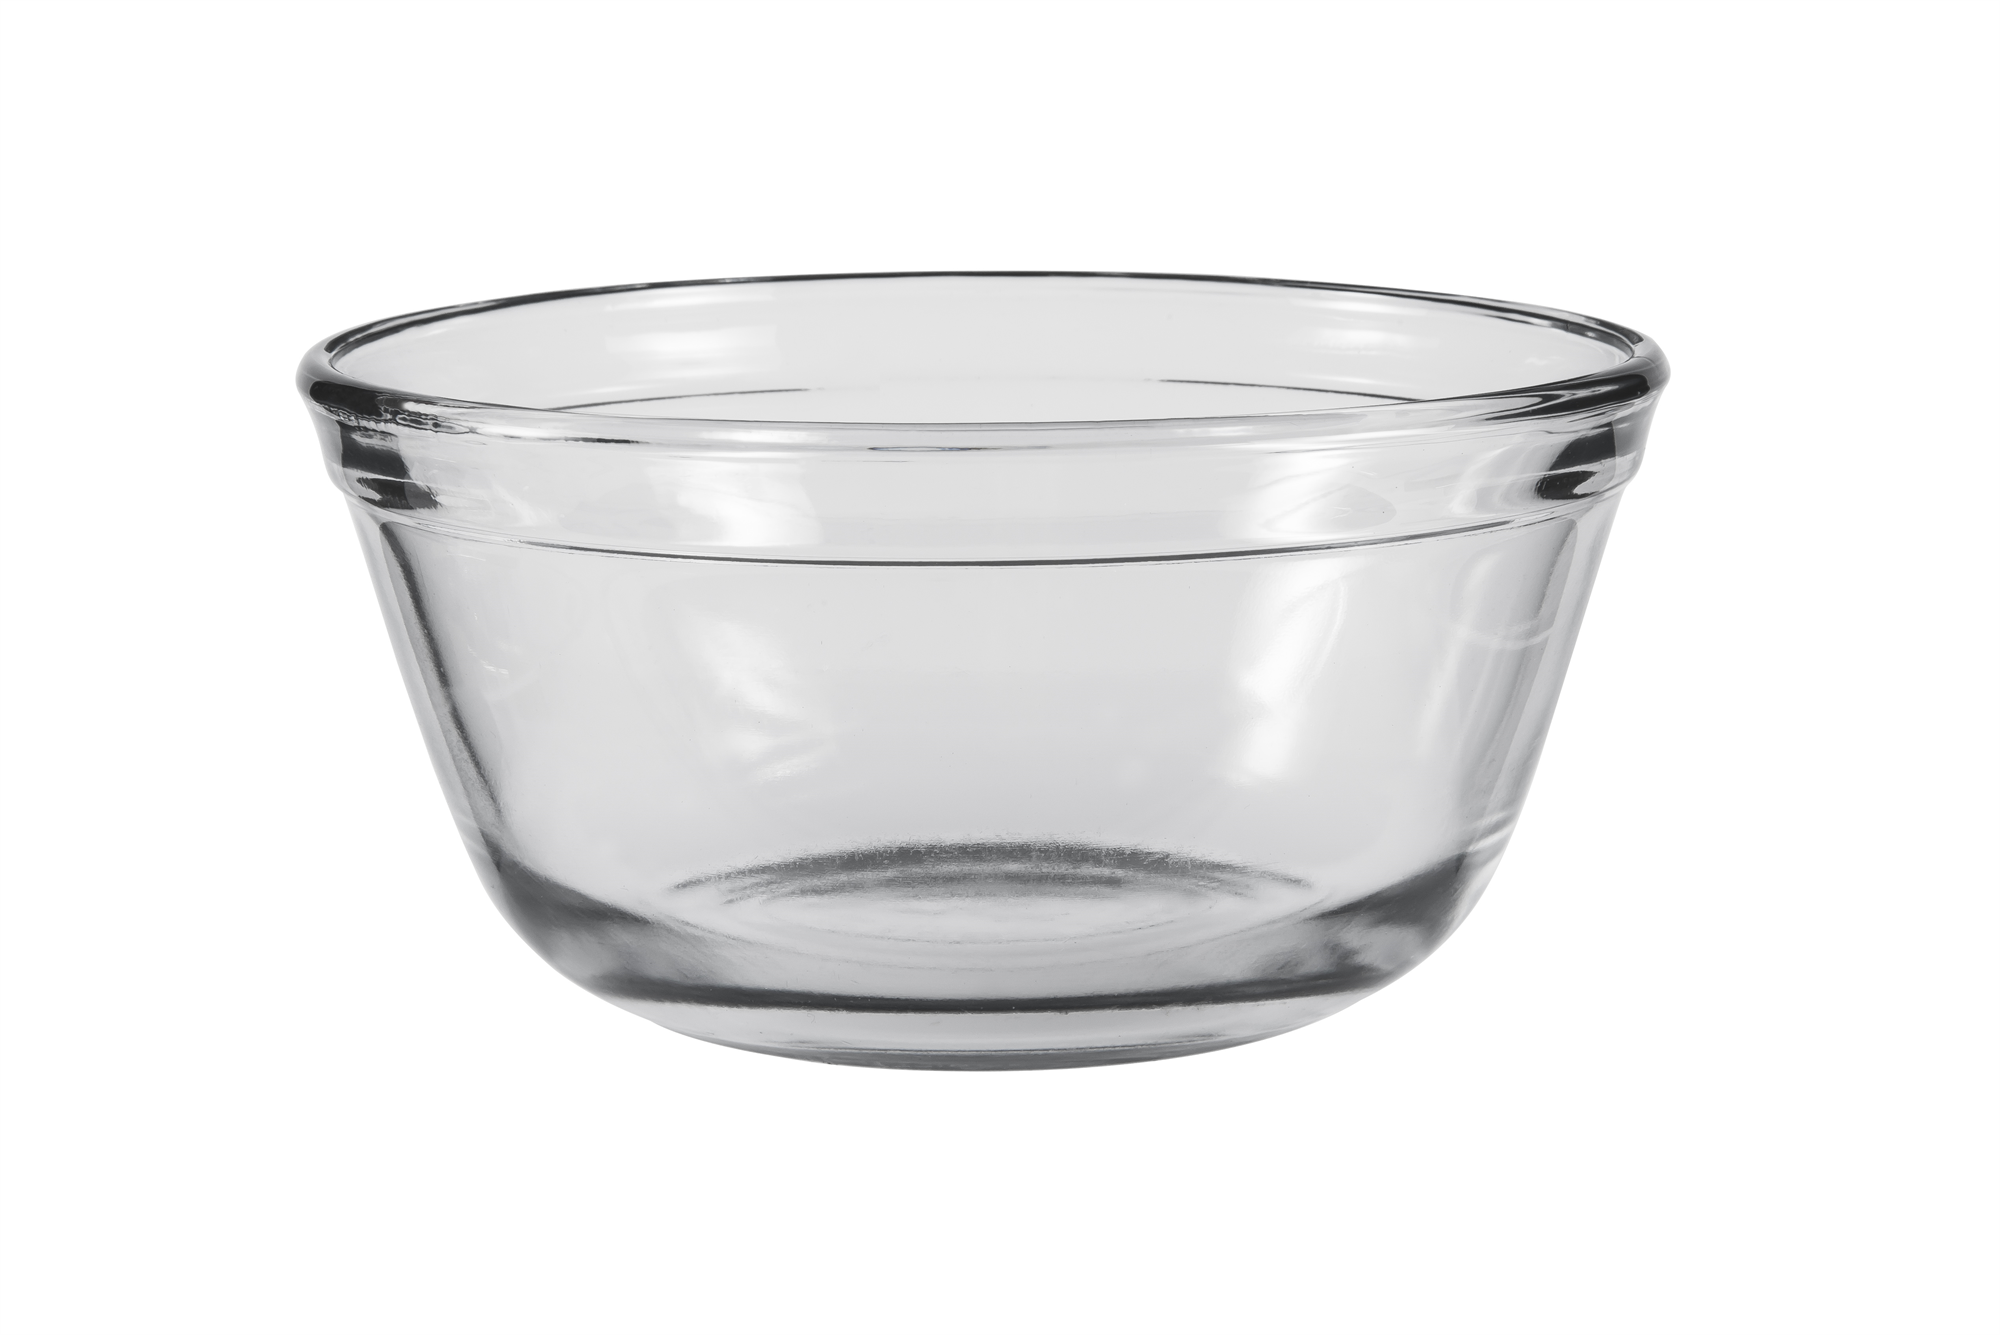 Buy the Anchor Hocking Glass Mixing Bowl 1 Litre online at smithsofloughton.com